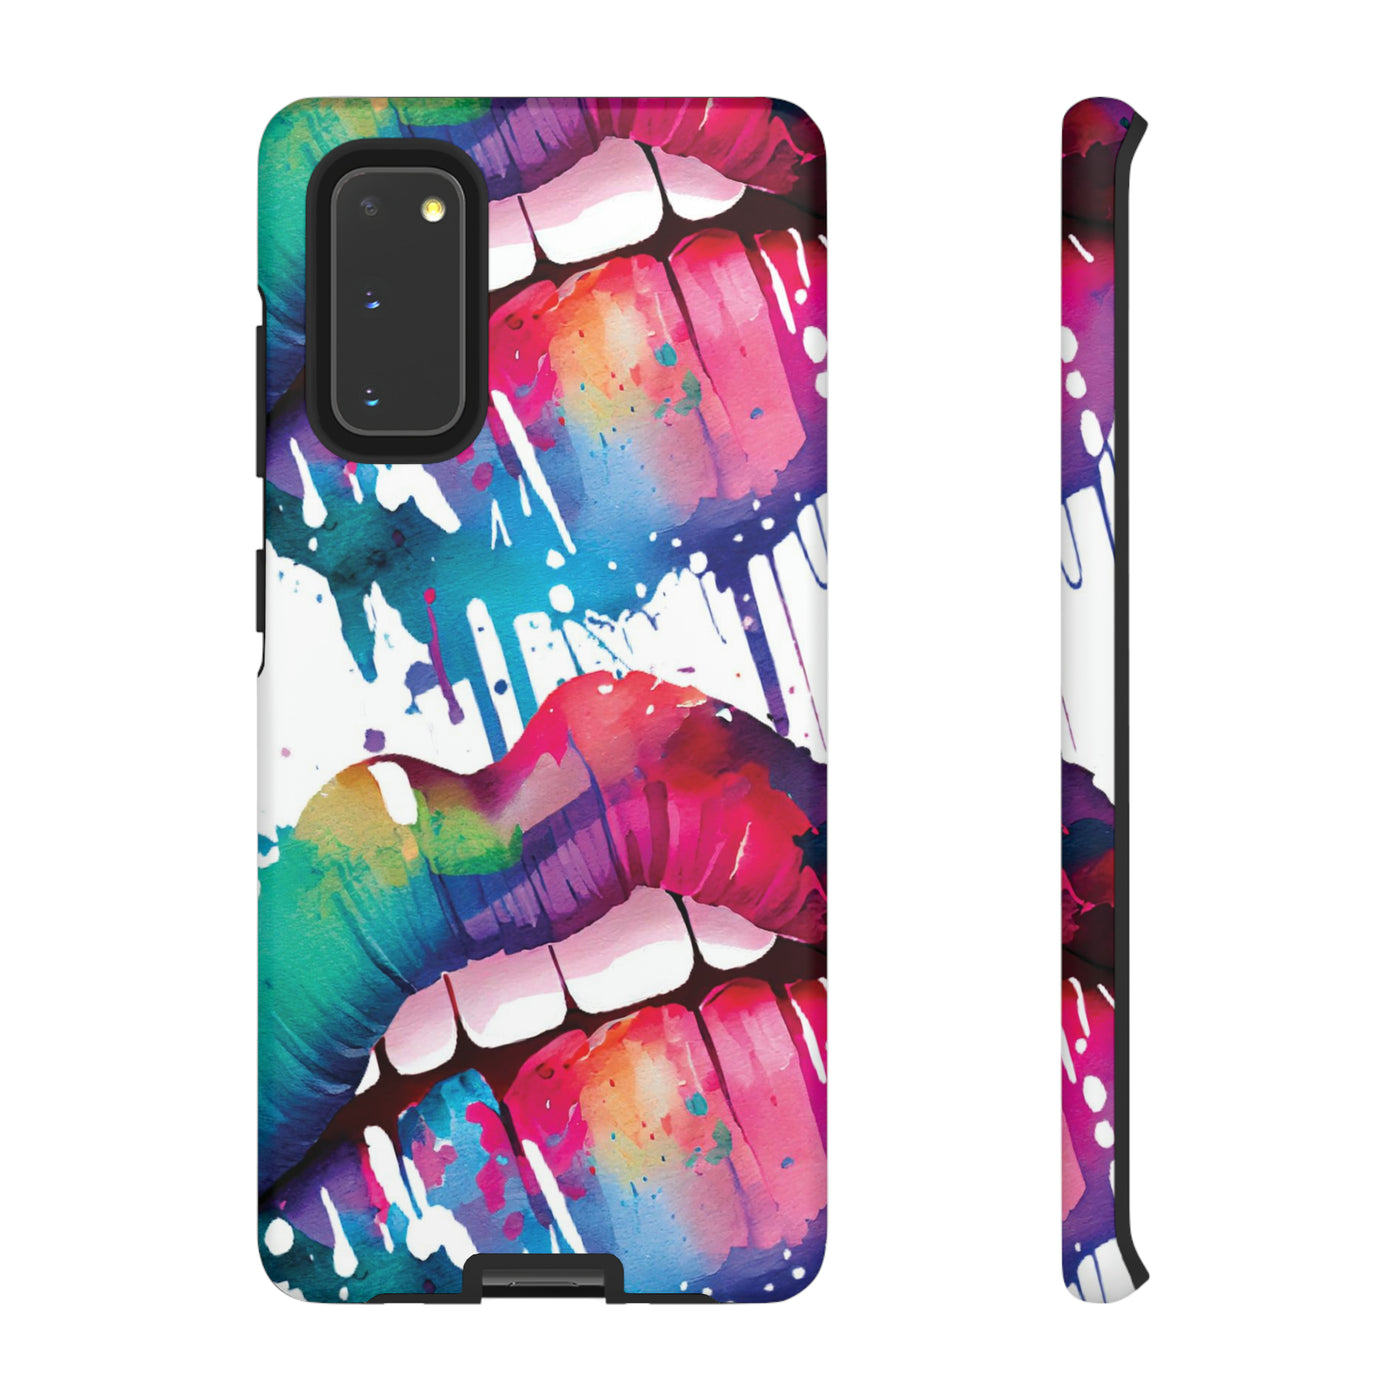 Cute Samsung Phone Case | Aesthetic Samsung Phone Case | Smile Lips Colorful | Galaxy S23, S22, S21, S20 | Luxury Double Layer | Cool